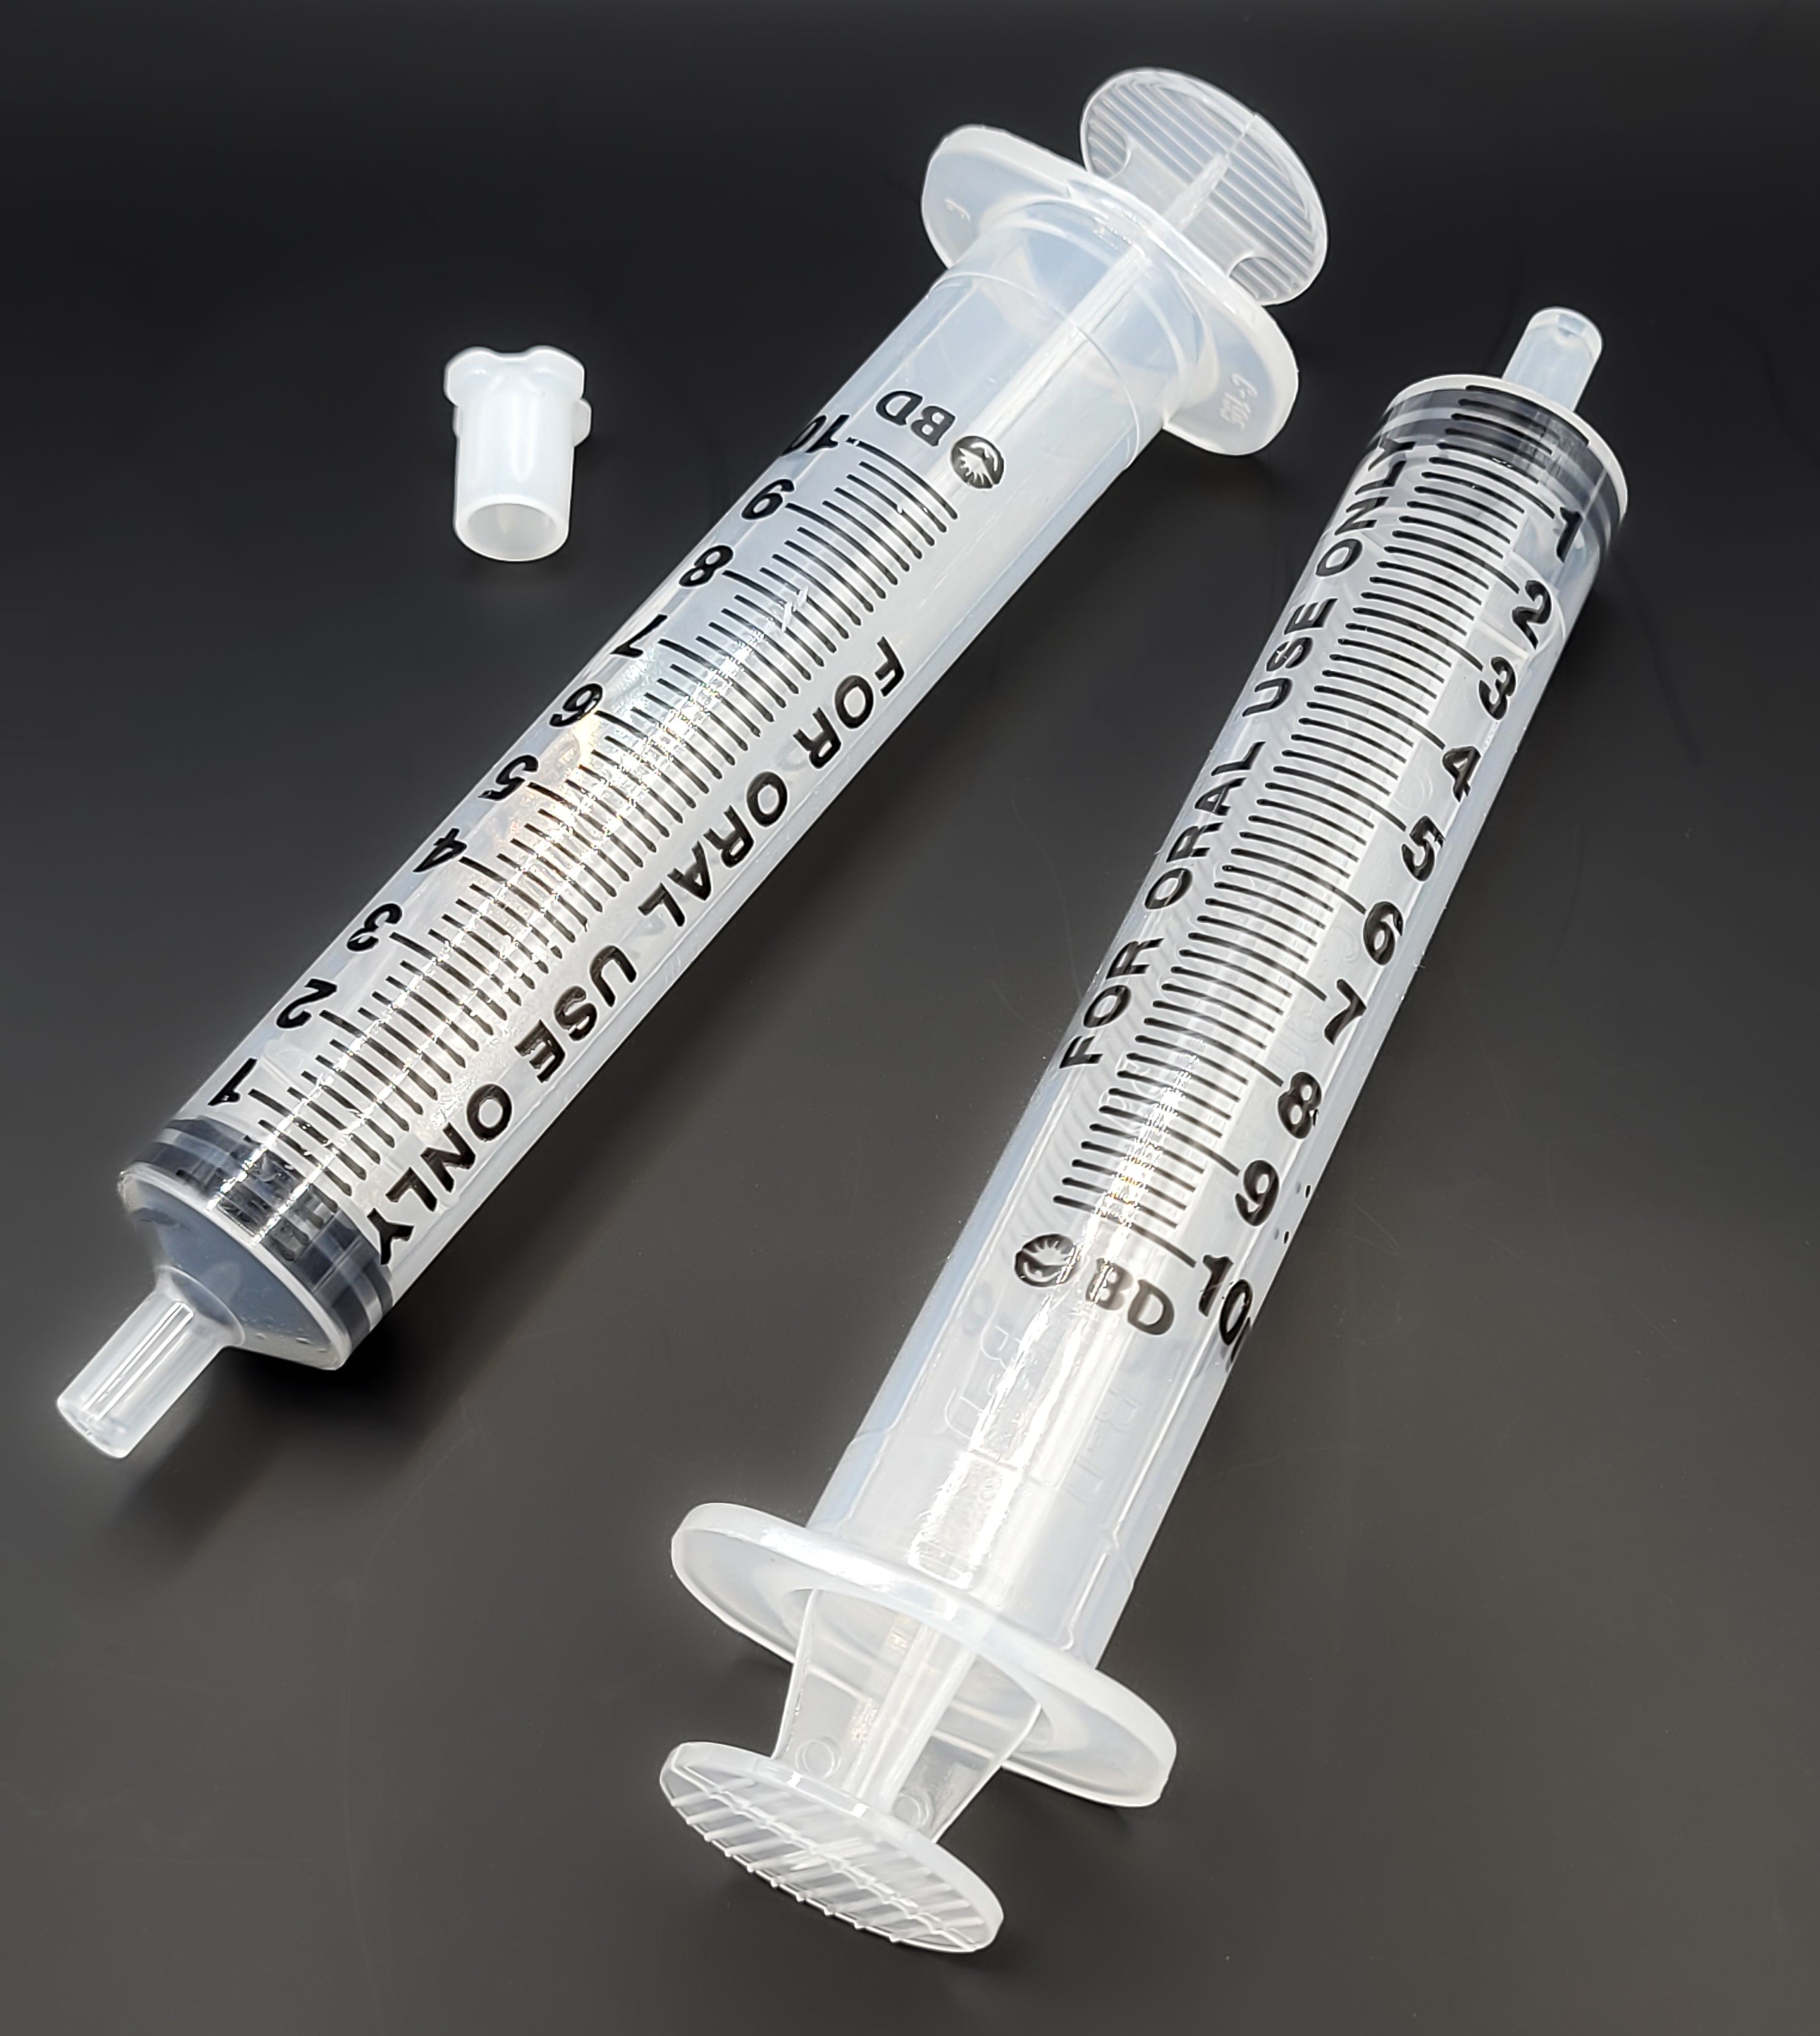 BD Clear Oral Syringes with tips (10ml)